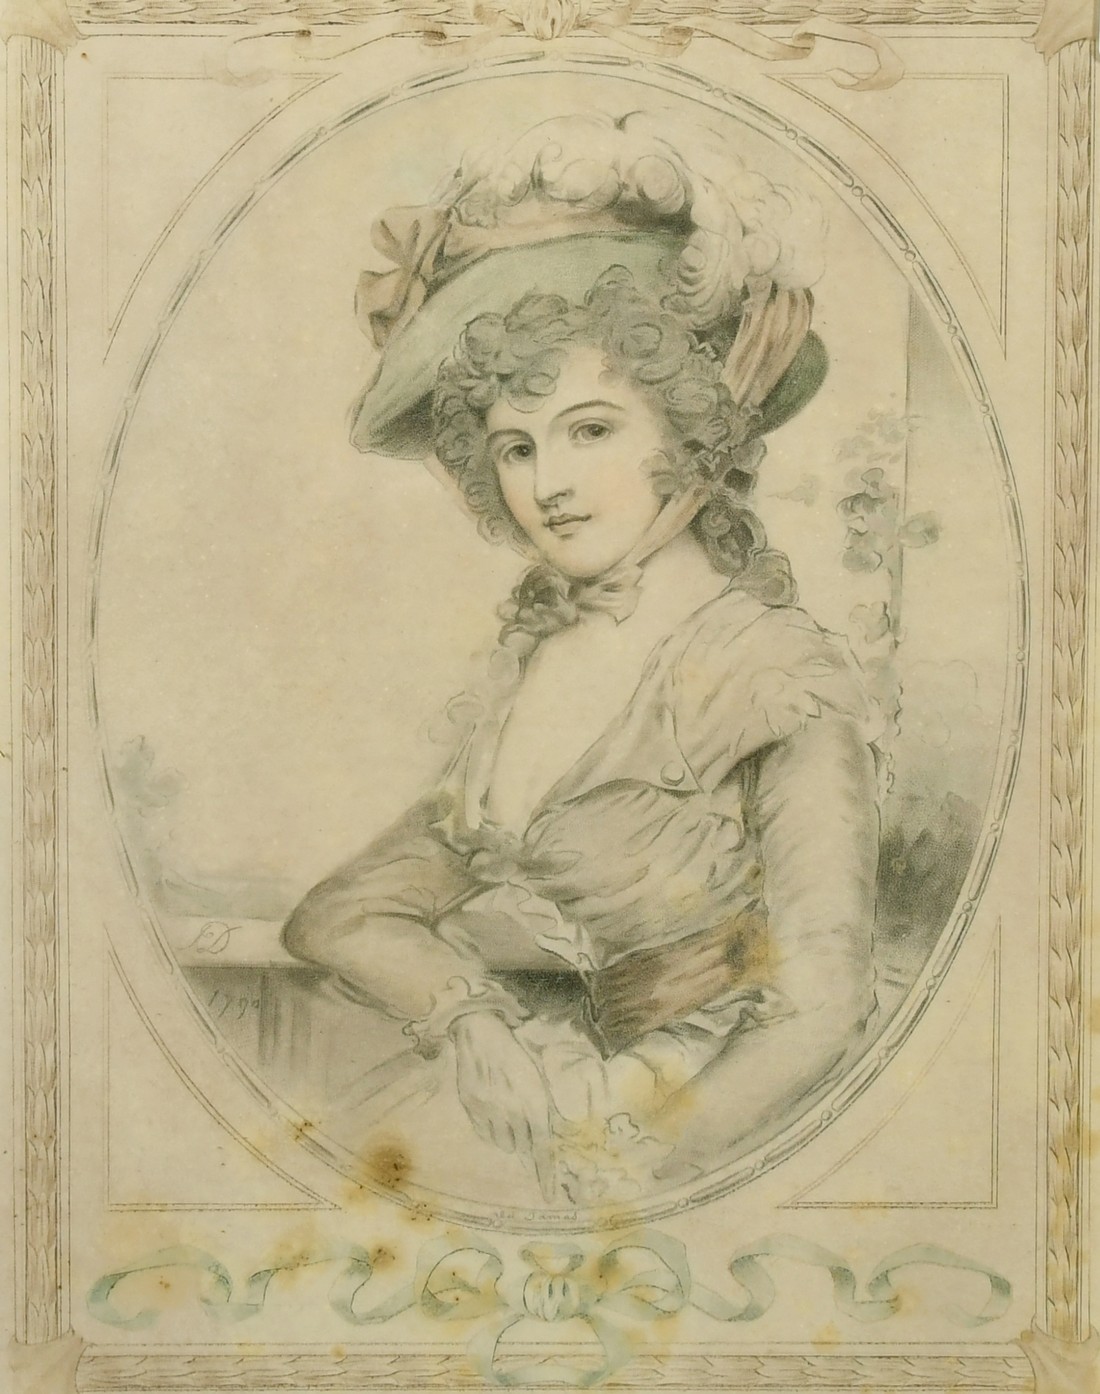 After John Downman (1750-1824) Five coloured lithographs, Portraits of ladies, published 1908 and